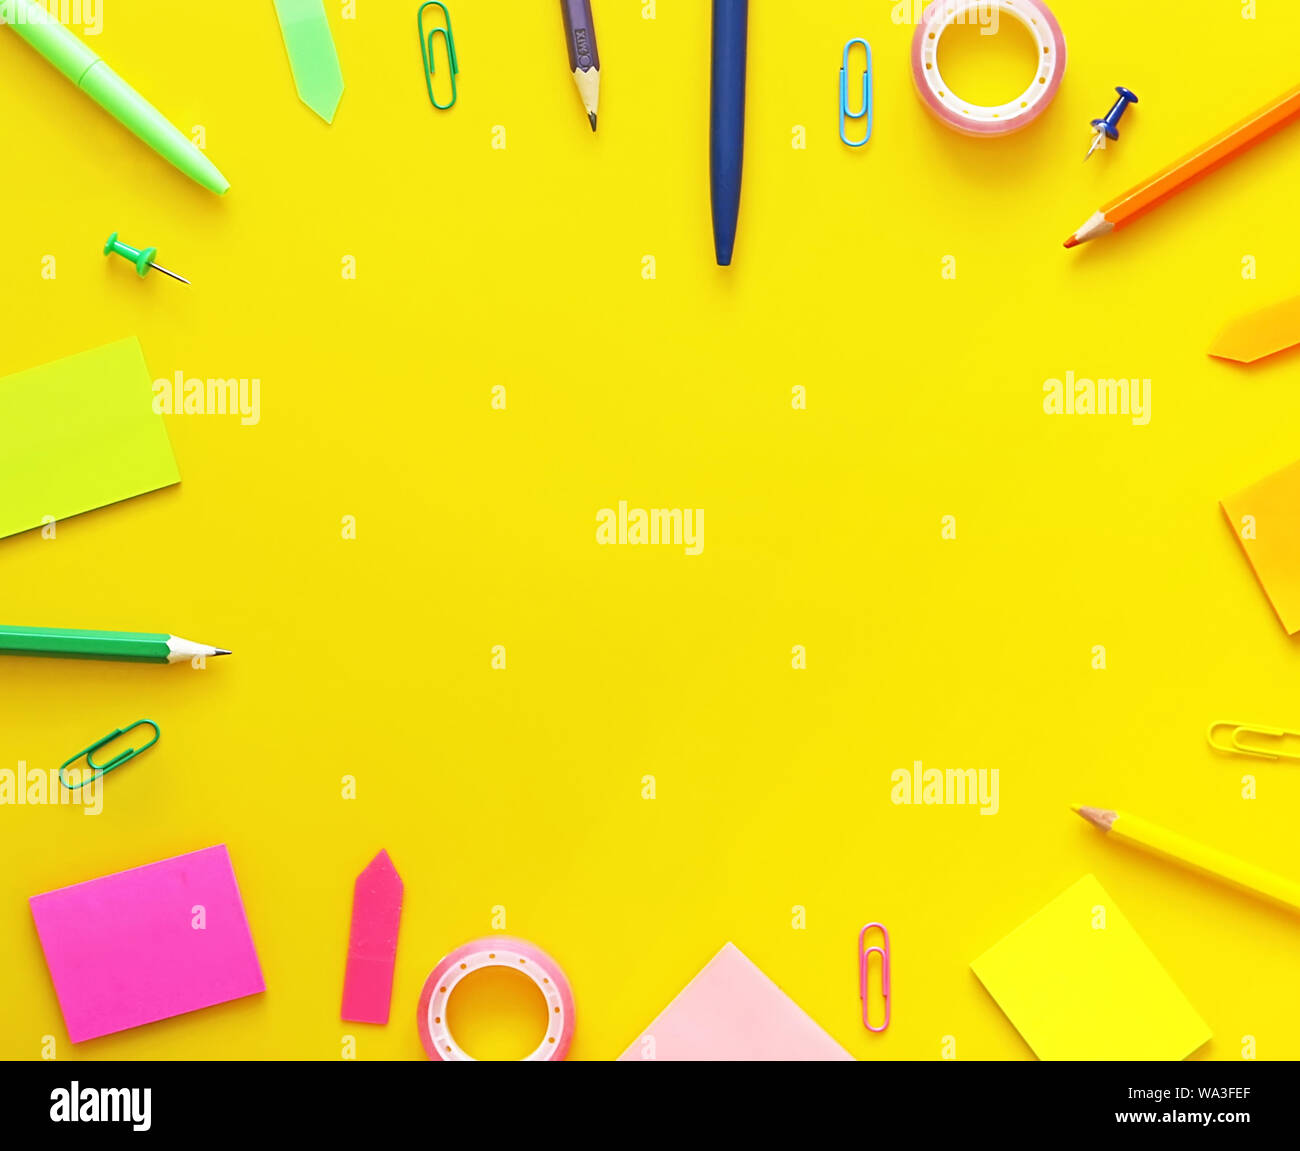 Flat lay of office, school stationery on pink background Stock Photo by  rawf8